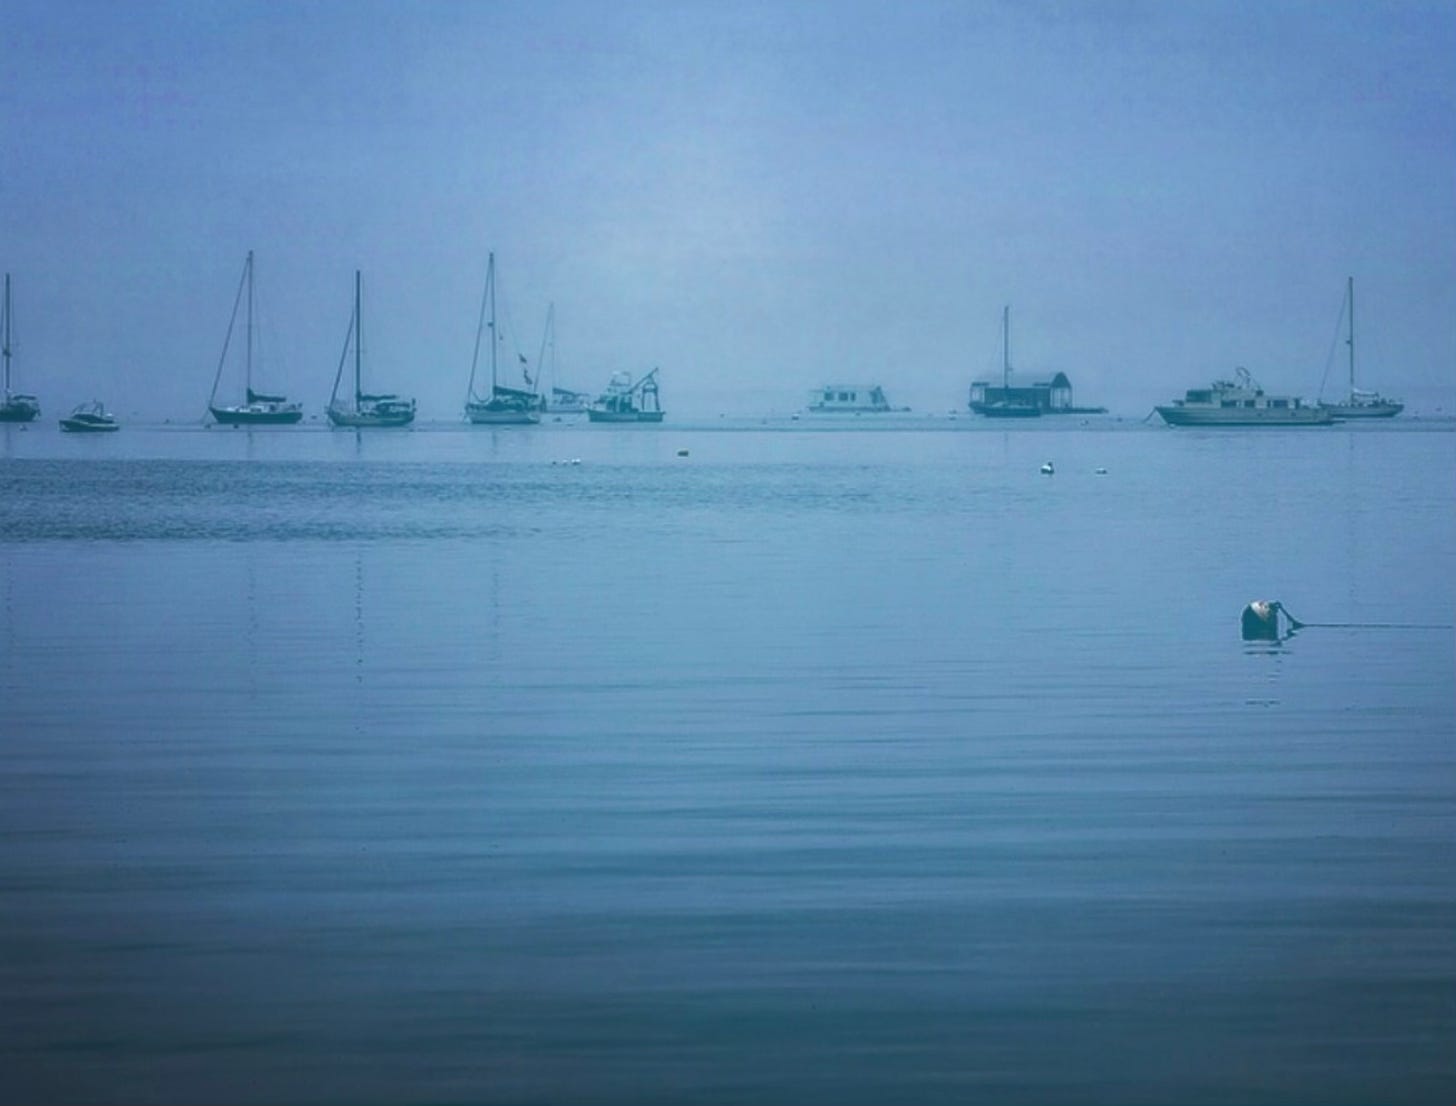 A monochrome blue photograph of Provincetown Harbor on a misty day. Where the water meets the sky there is a line of sailboats, with tall masts at anchor, and a few other boats including a houseboat. In the foreground a buoy floats among the ripples of the almost-still waters of the bay.